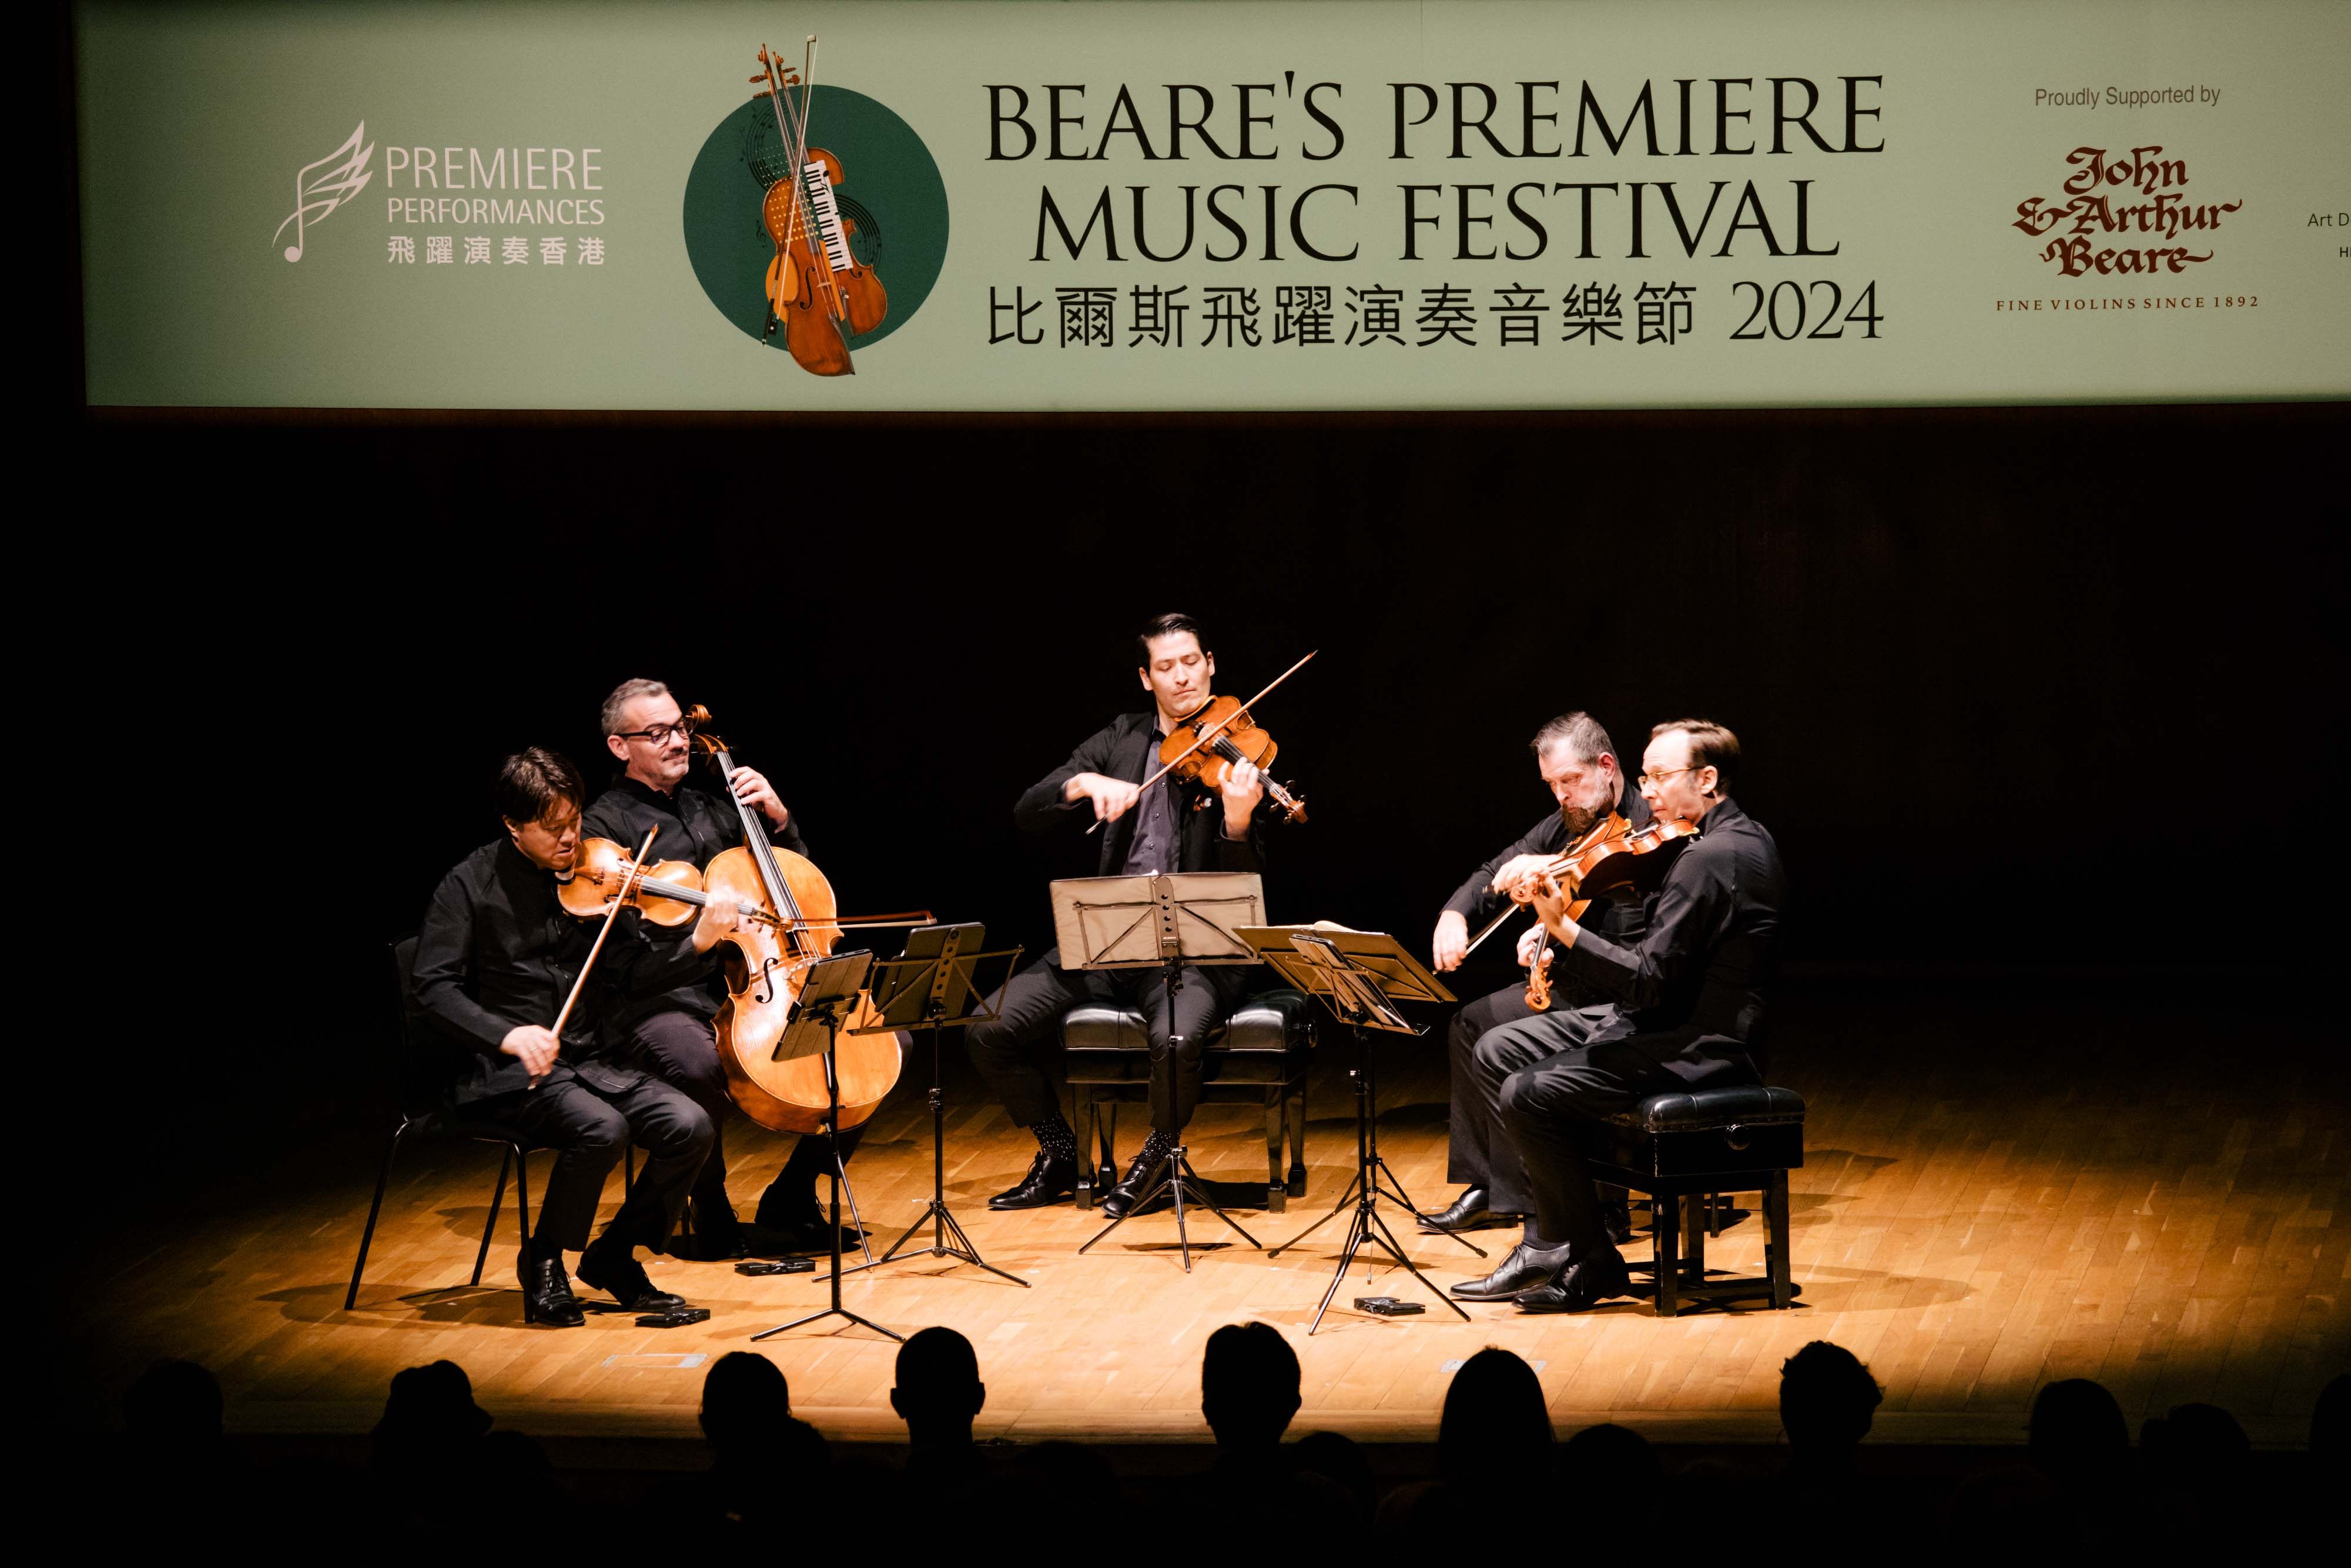 The Miro Quartet perform with violist Masumi Per Rostad (centre) for a performance of of Mozart’s String Quintet in G minor, KV 516 in the Beare’s Premiere Music Festival at Hong Kong City Hall Concert Hall. The annual feast of chamber music is promoted by Premier Performances. Photo: PPHK